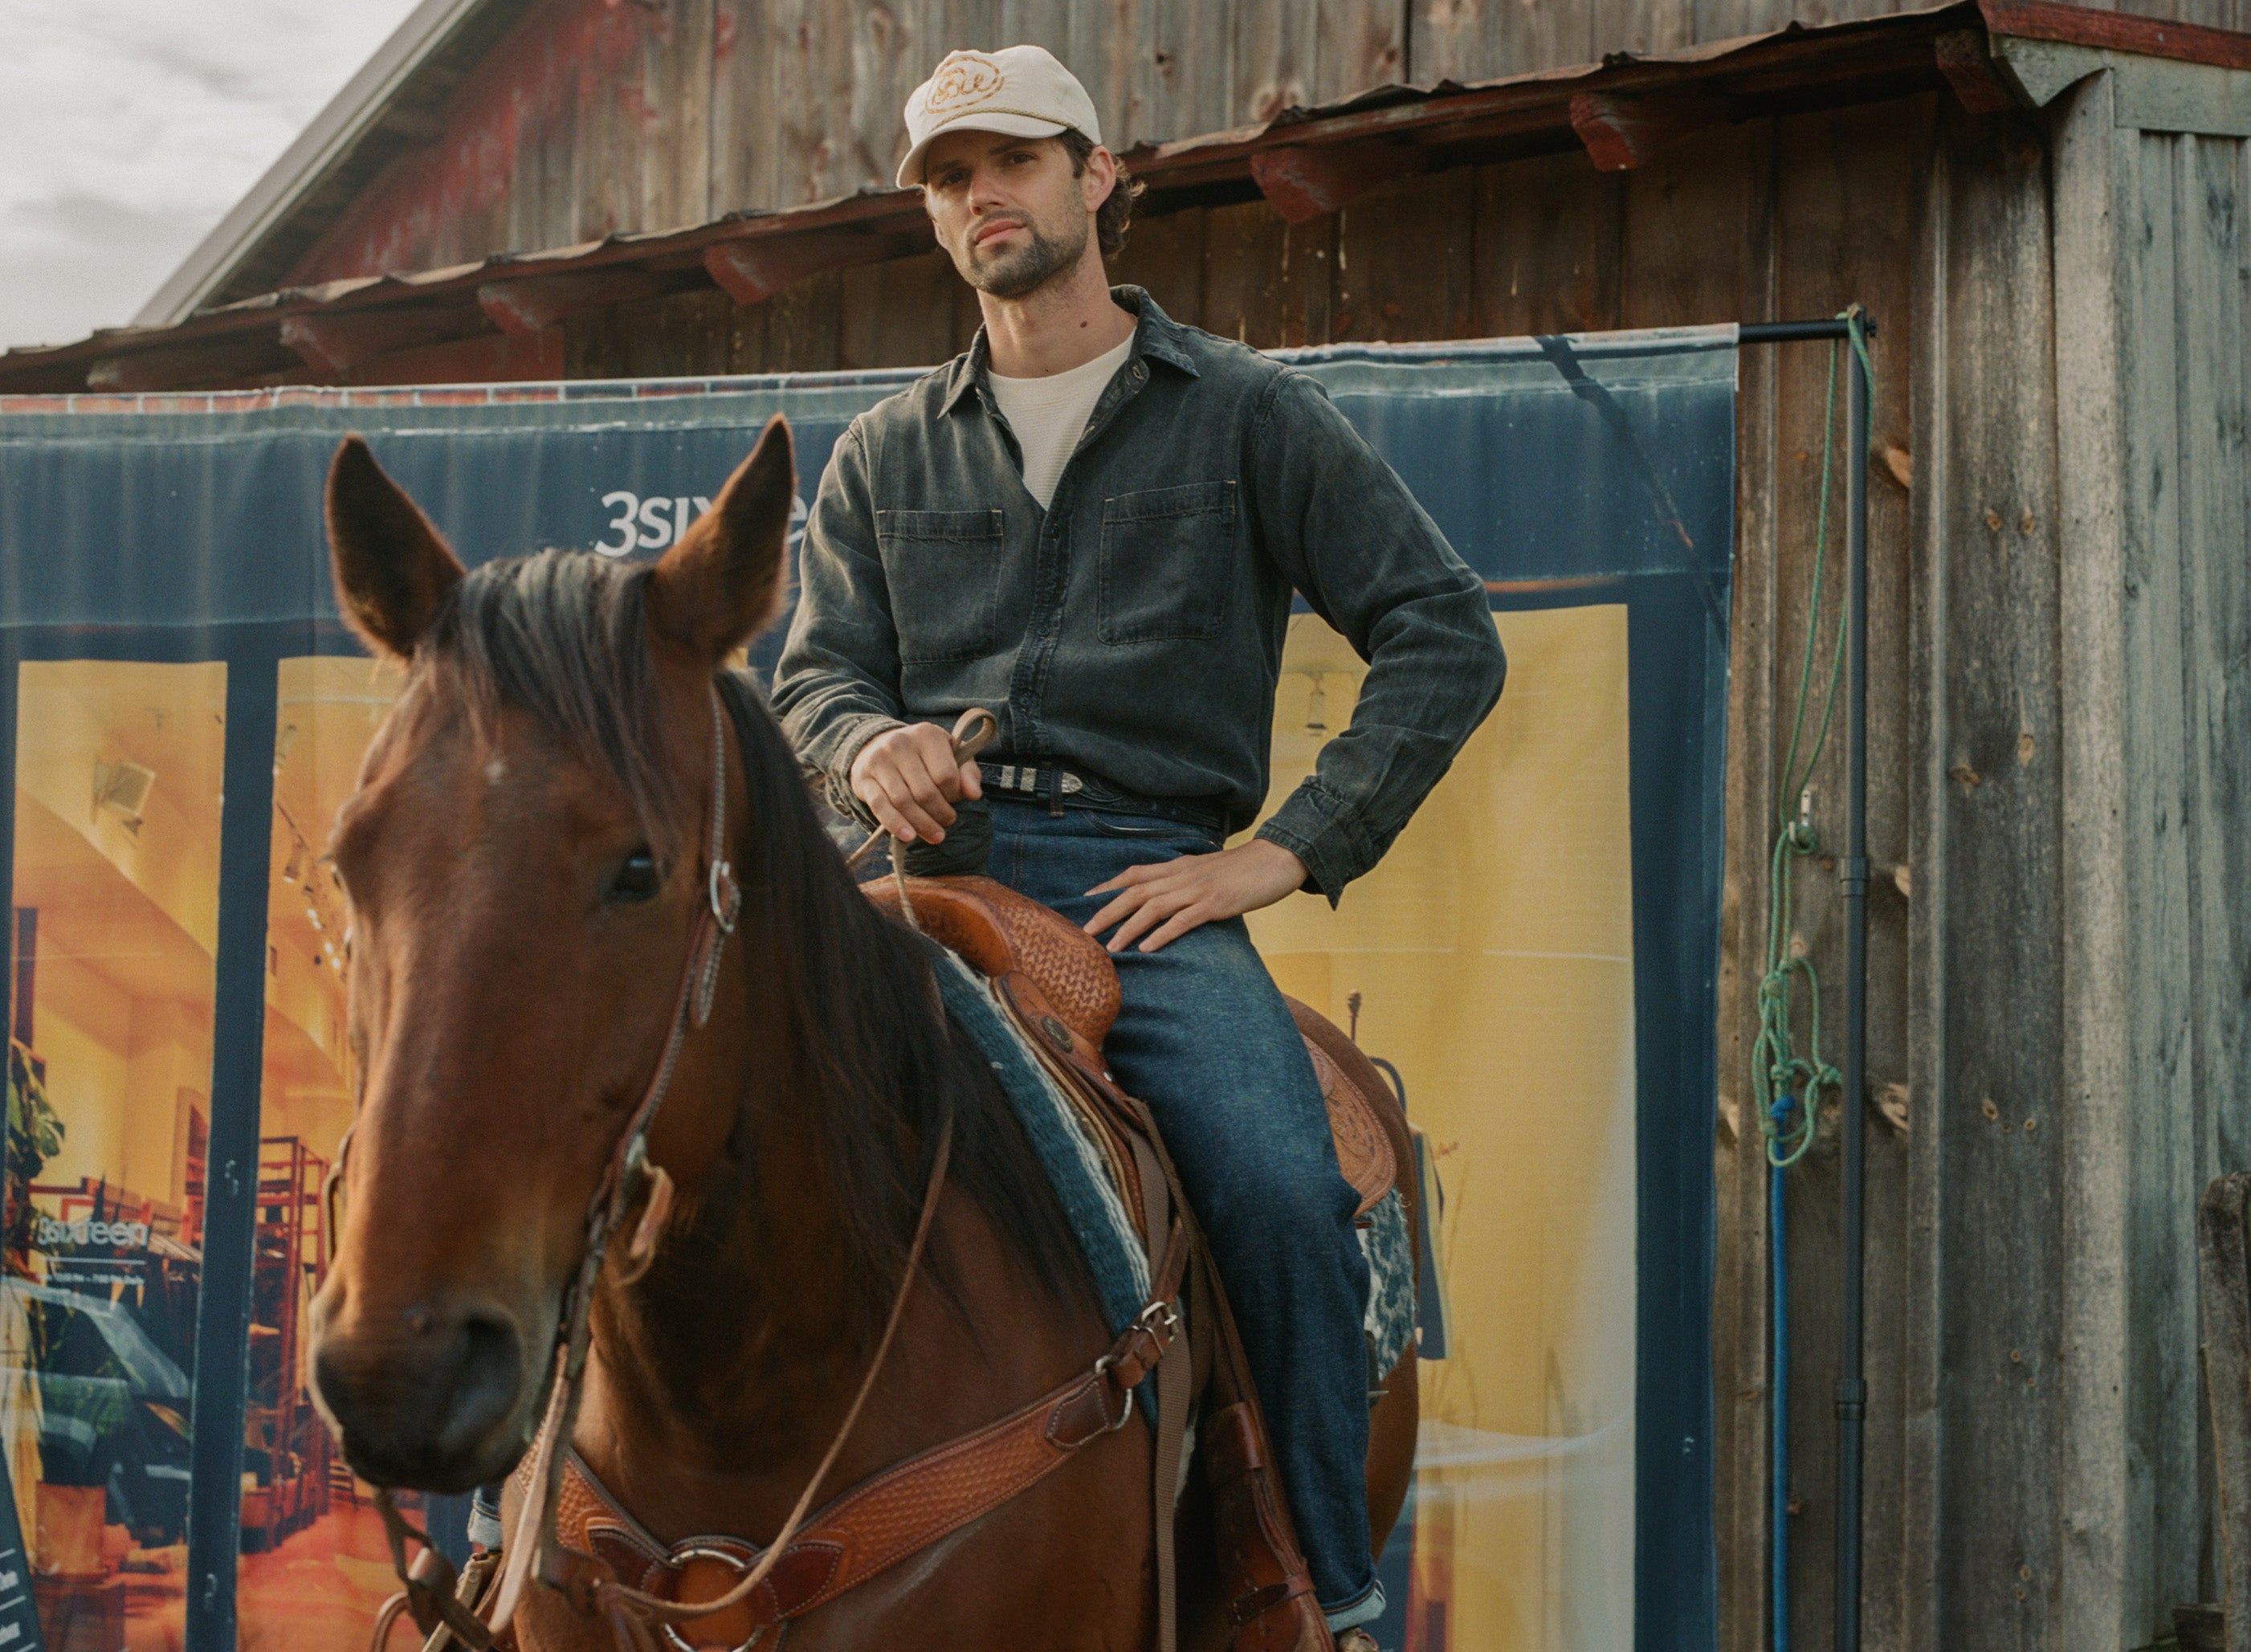 A man in a white hat, black shirt and blue jeans atop a horse.